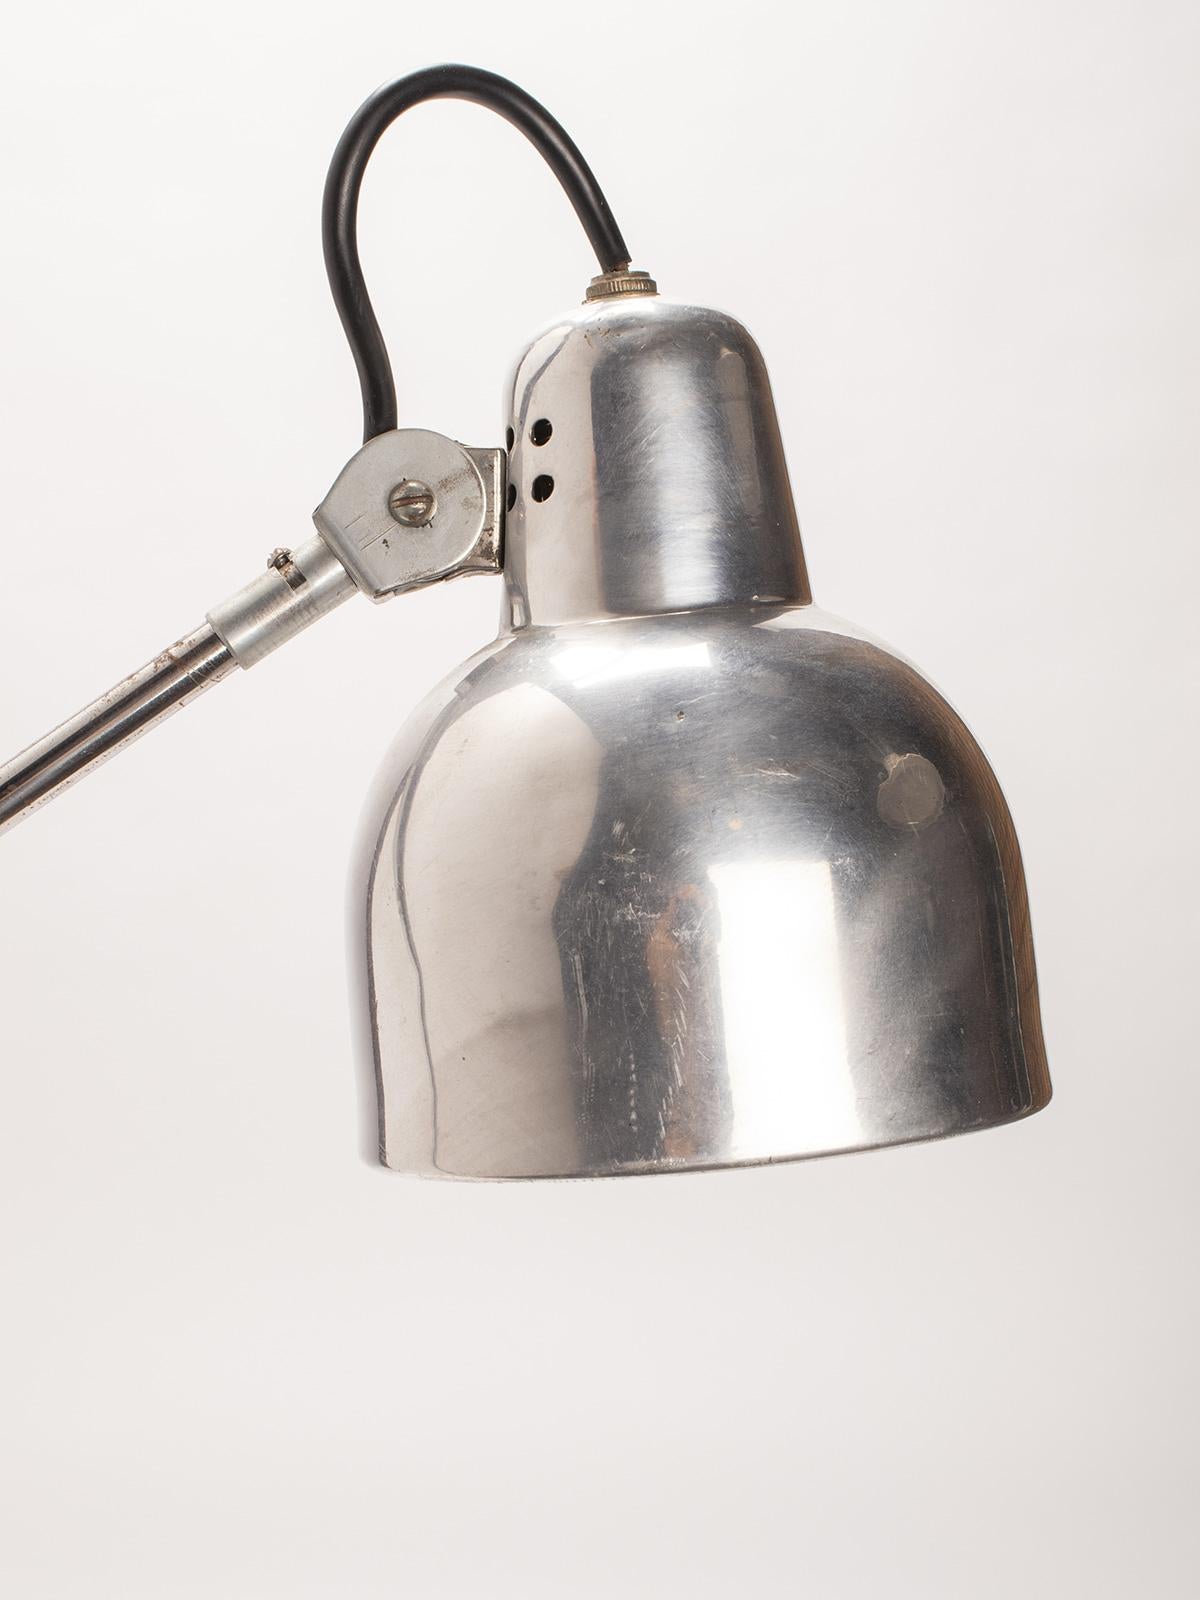 Adjustable aluminum table lamp, articulated on three points. It can be anchored to a table or desk with a clamp. Equipped with a conical shaped lampshade (7” x 5,5”). Re-electrified. France circa 1930.

